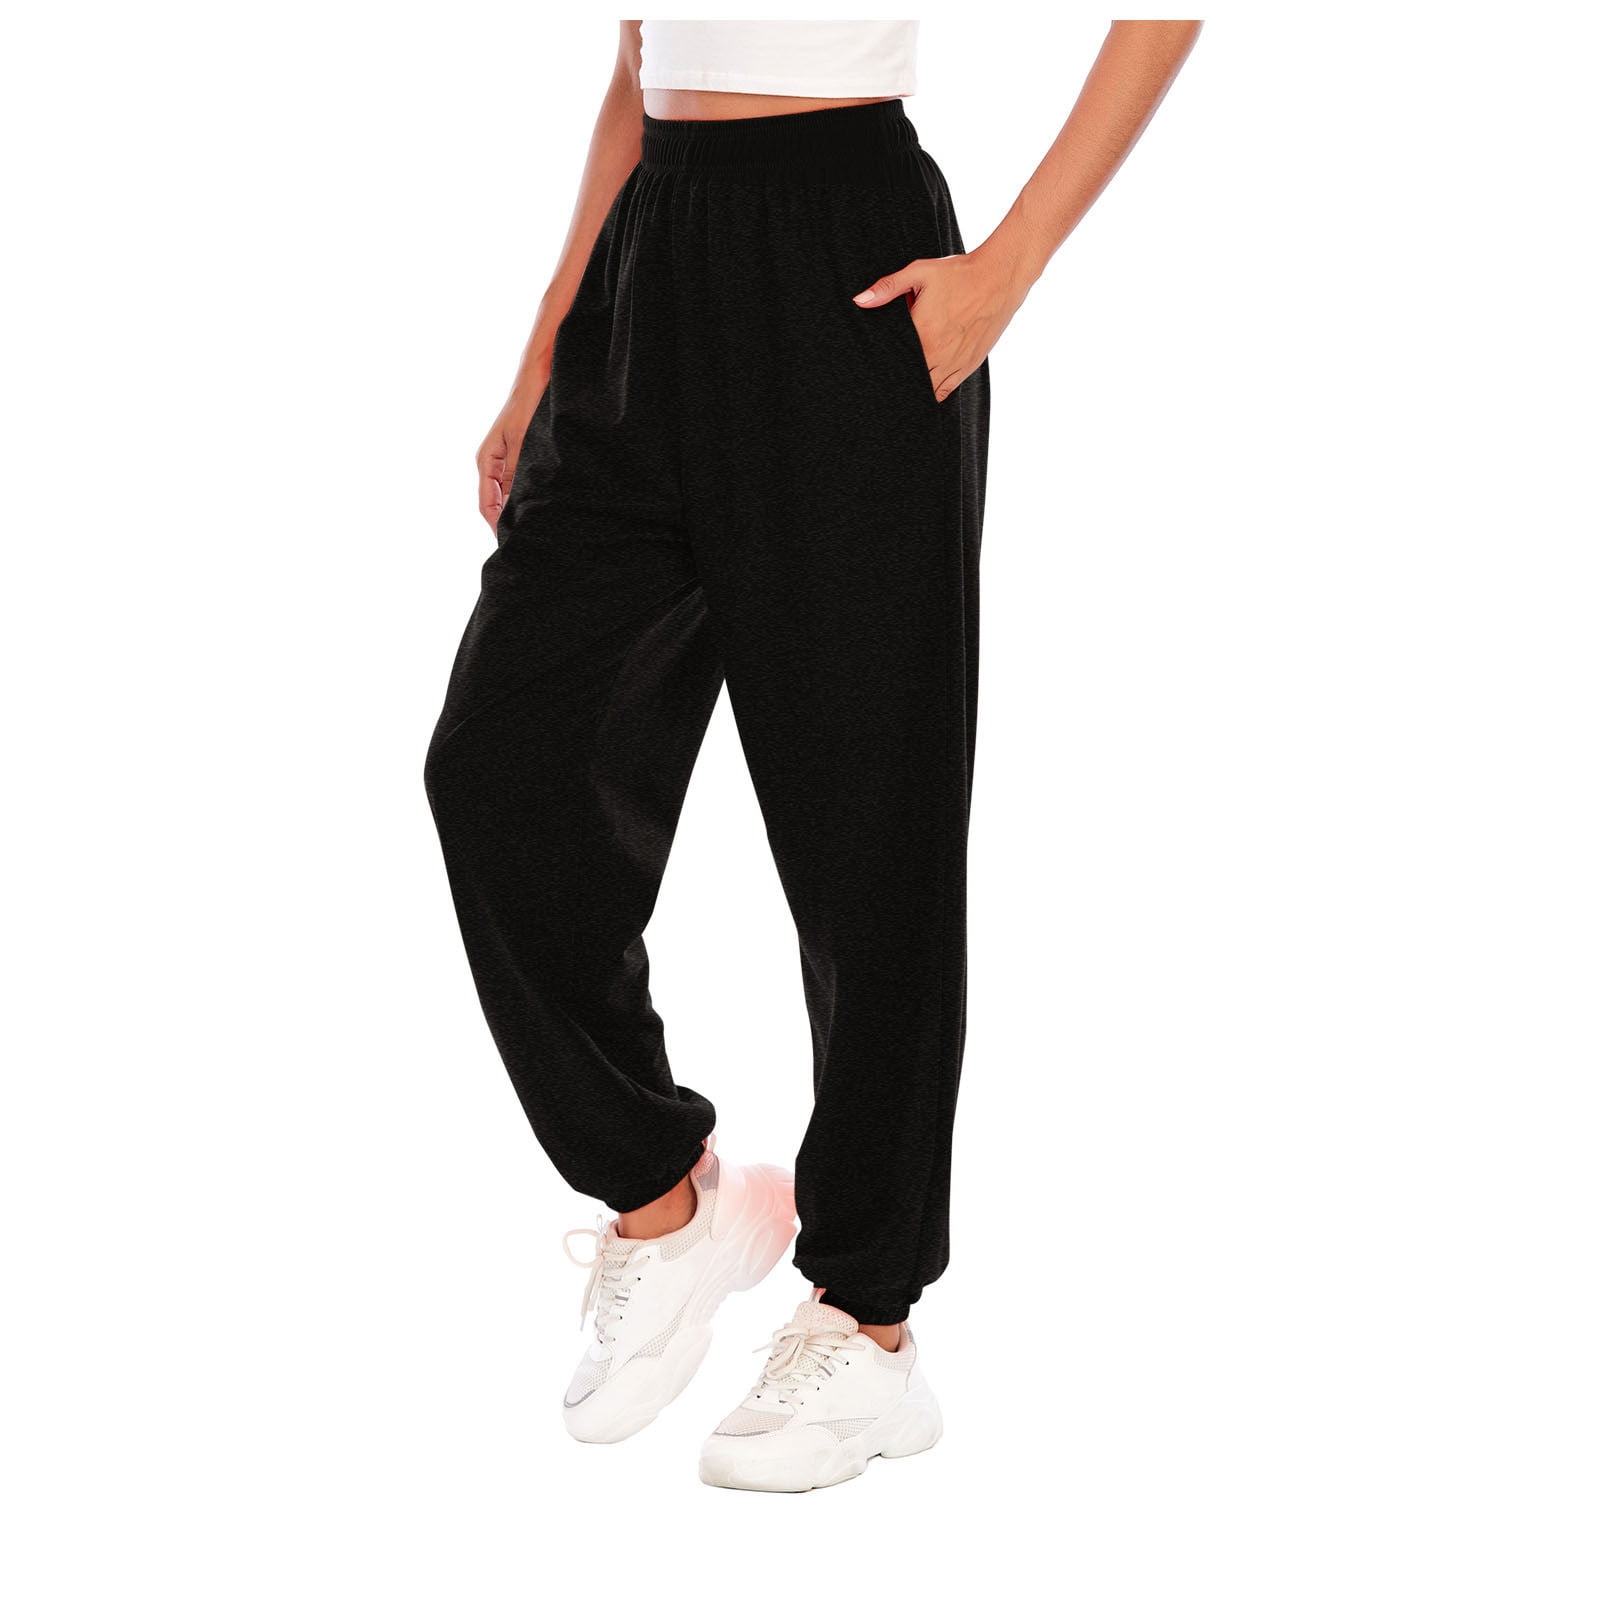 XFLWAM Women's Casual Baggy Sweatpants High Waisted Running Joggers Pants  Athletic Trousers with Pockets Drawstring Track Pants Navy Blue XL 